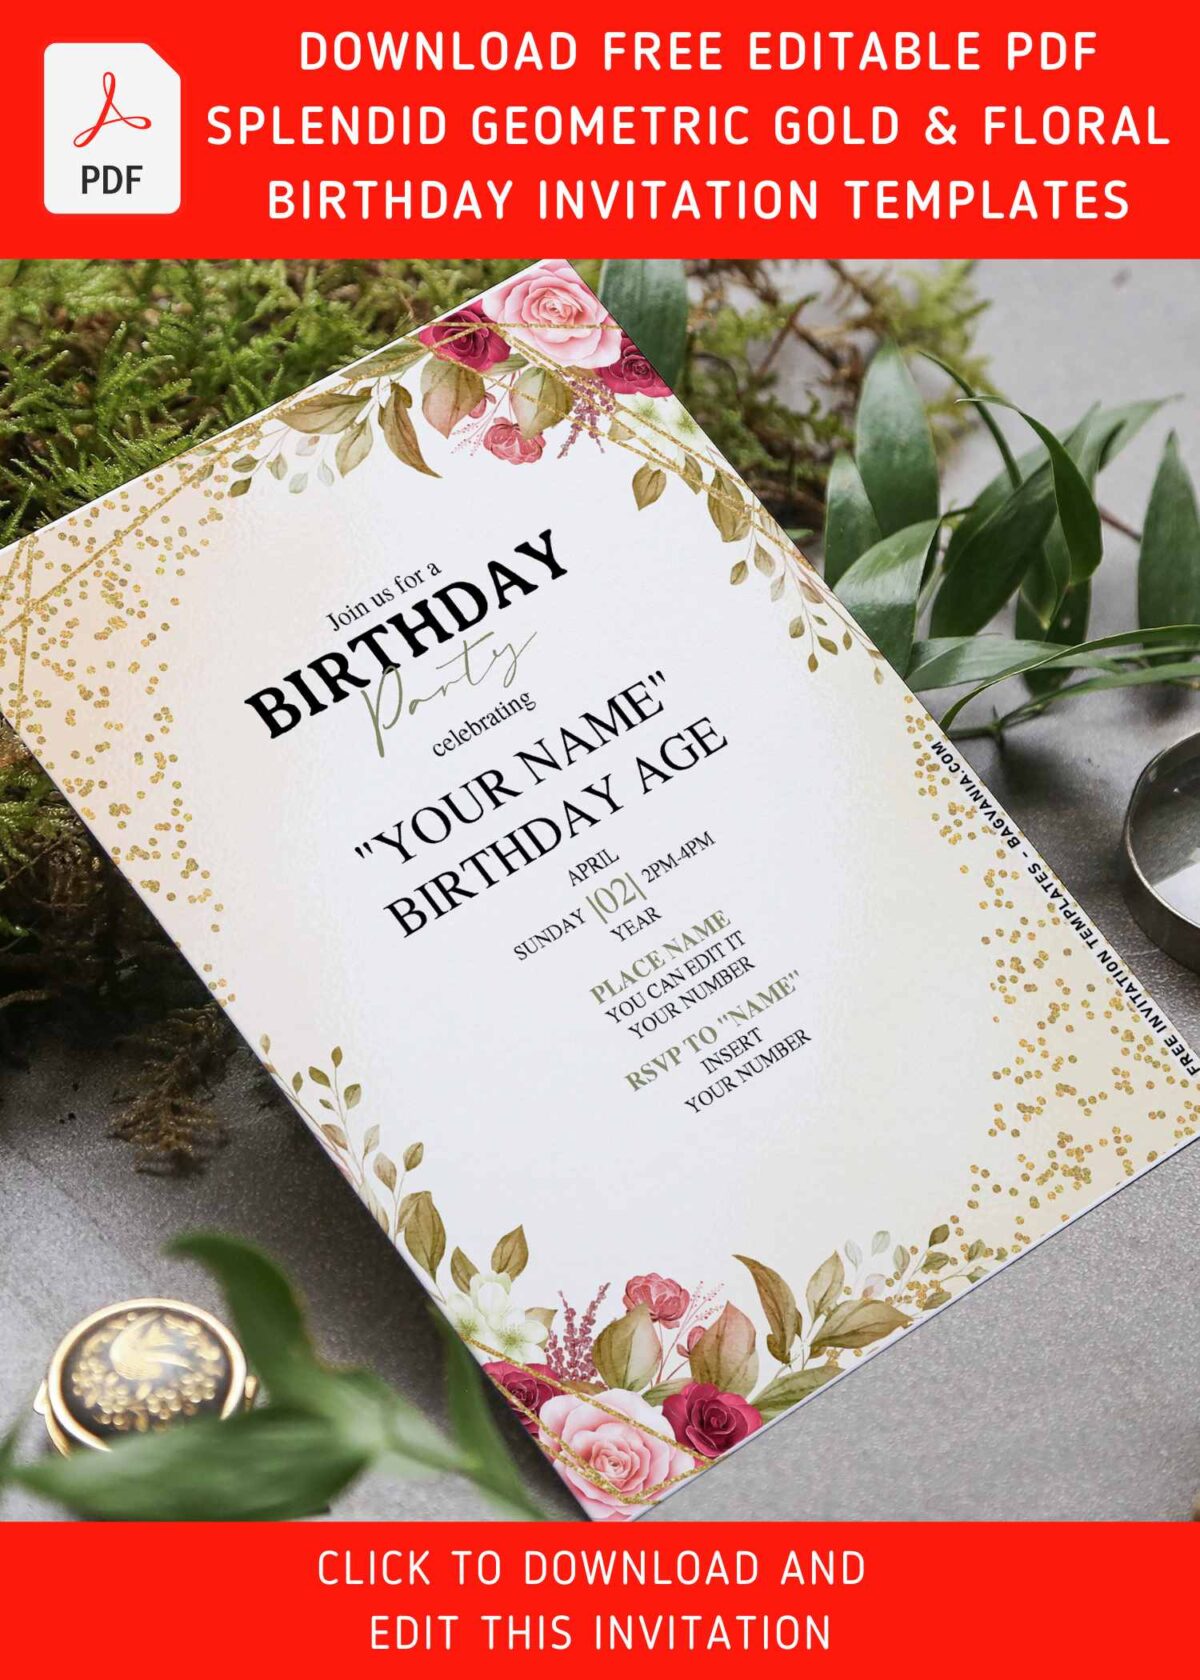 (Free Editable PDF) Champagne Gold Glitter Floral Birthday Invitation Templates with glimmered glitter gold sparkles